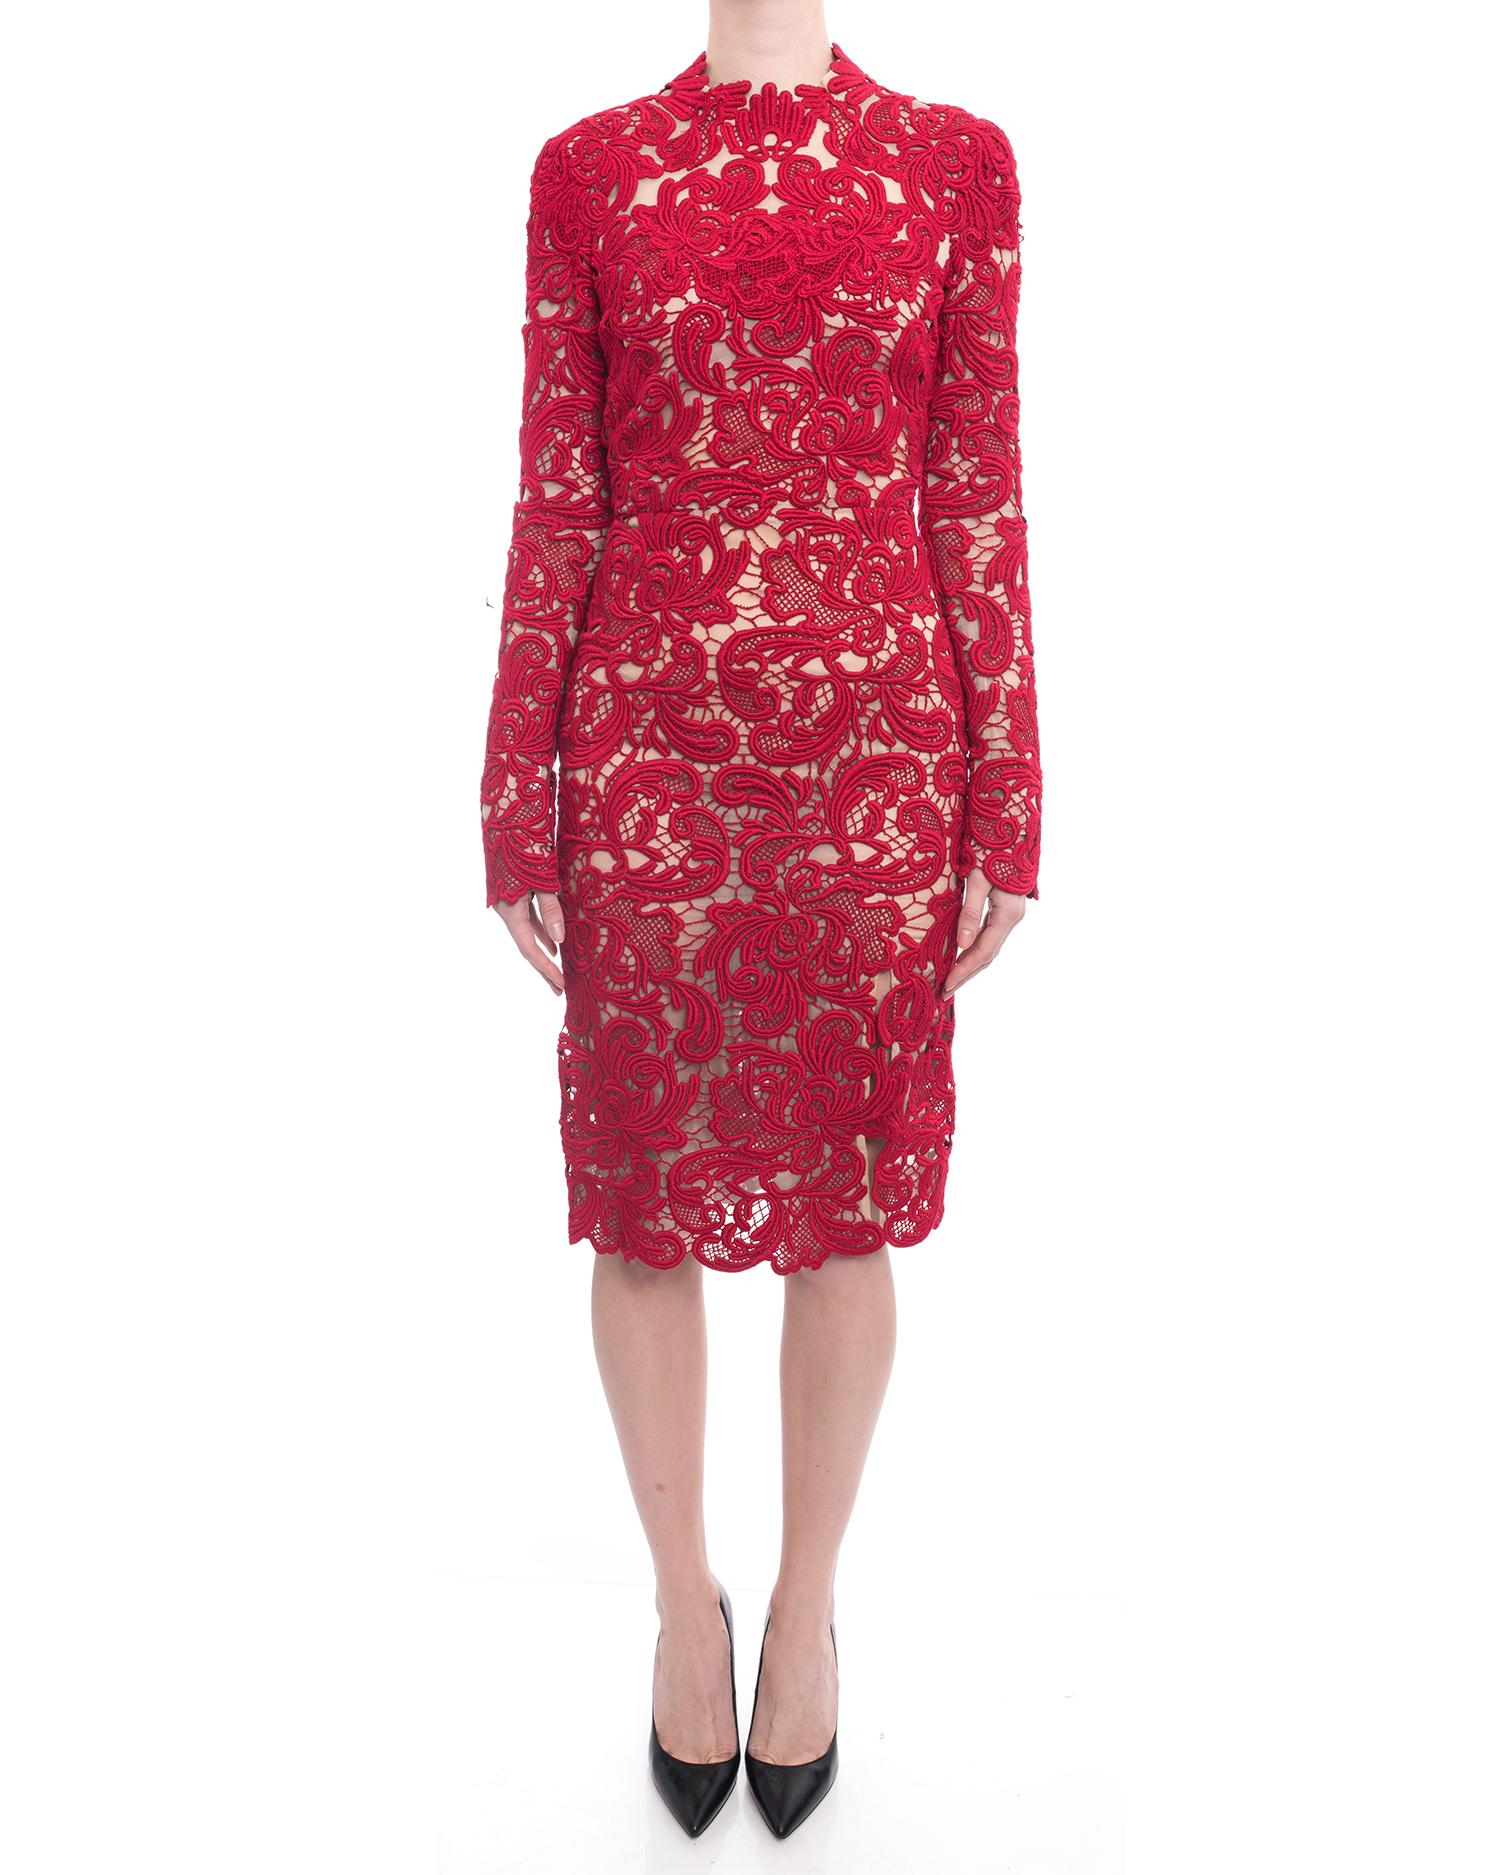 Erdem Fall 2015 Red Guipure Lace Long Sleeve Cocktail Dress.  Exposed gold center back zipper, long sleeve, fitted hourglass silhouette.  Lined with nude silk.  Garment is marked size FR 36 but best for USA 2 or a 4 with narrow hips. Garment fits